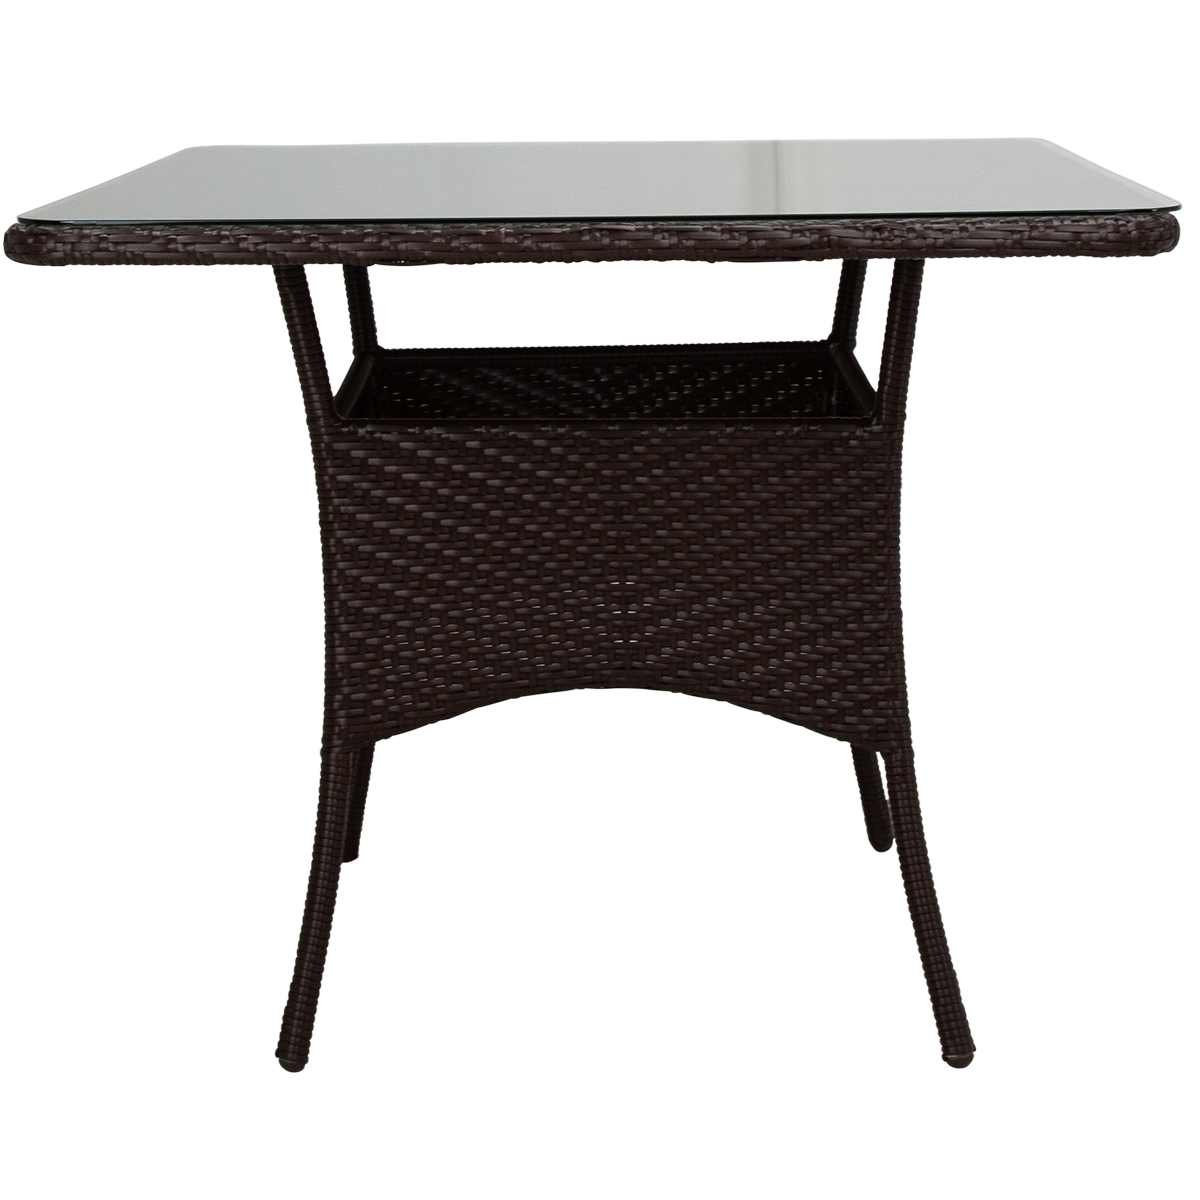 Picture of BAHIA BISTRO TABLE W/GLASS TOP